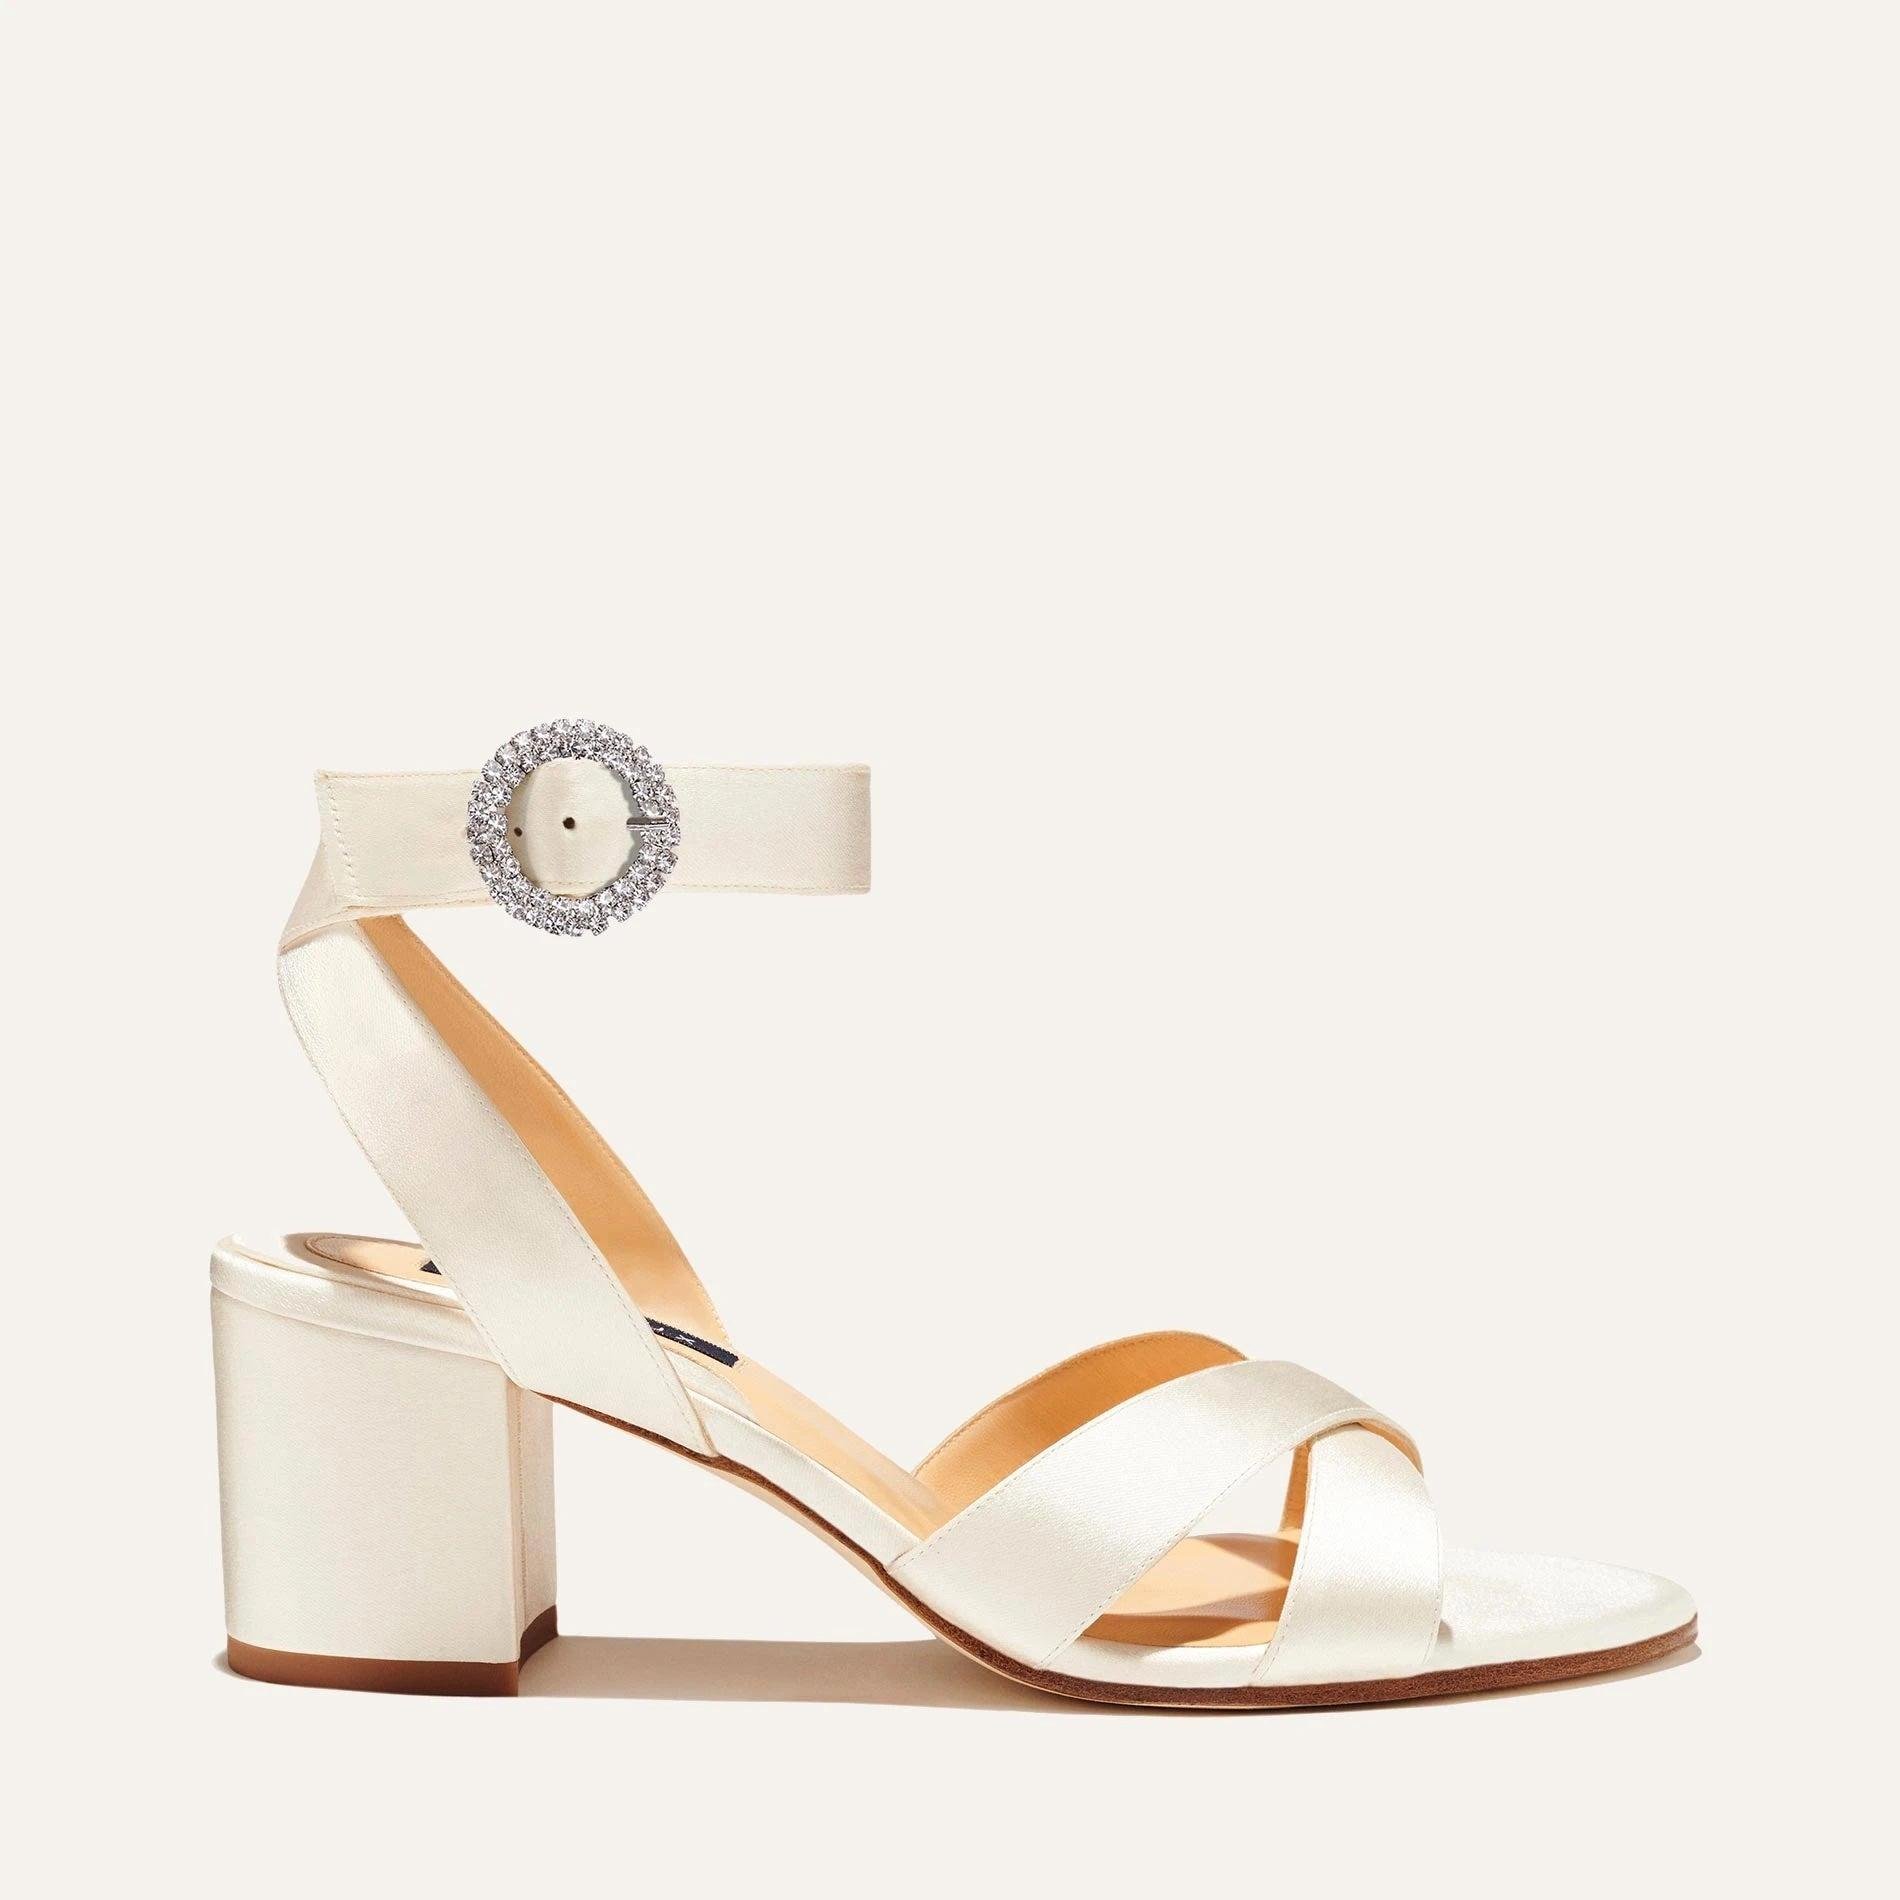 The City Sandal - Ivory Satin with Crystal Buckle by MARGAUX